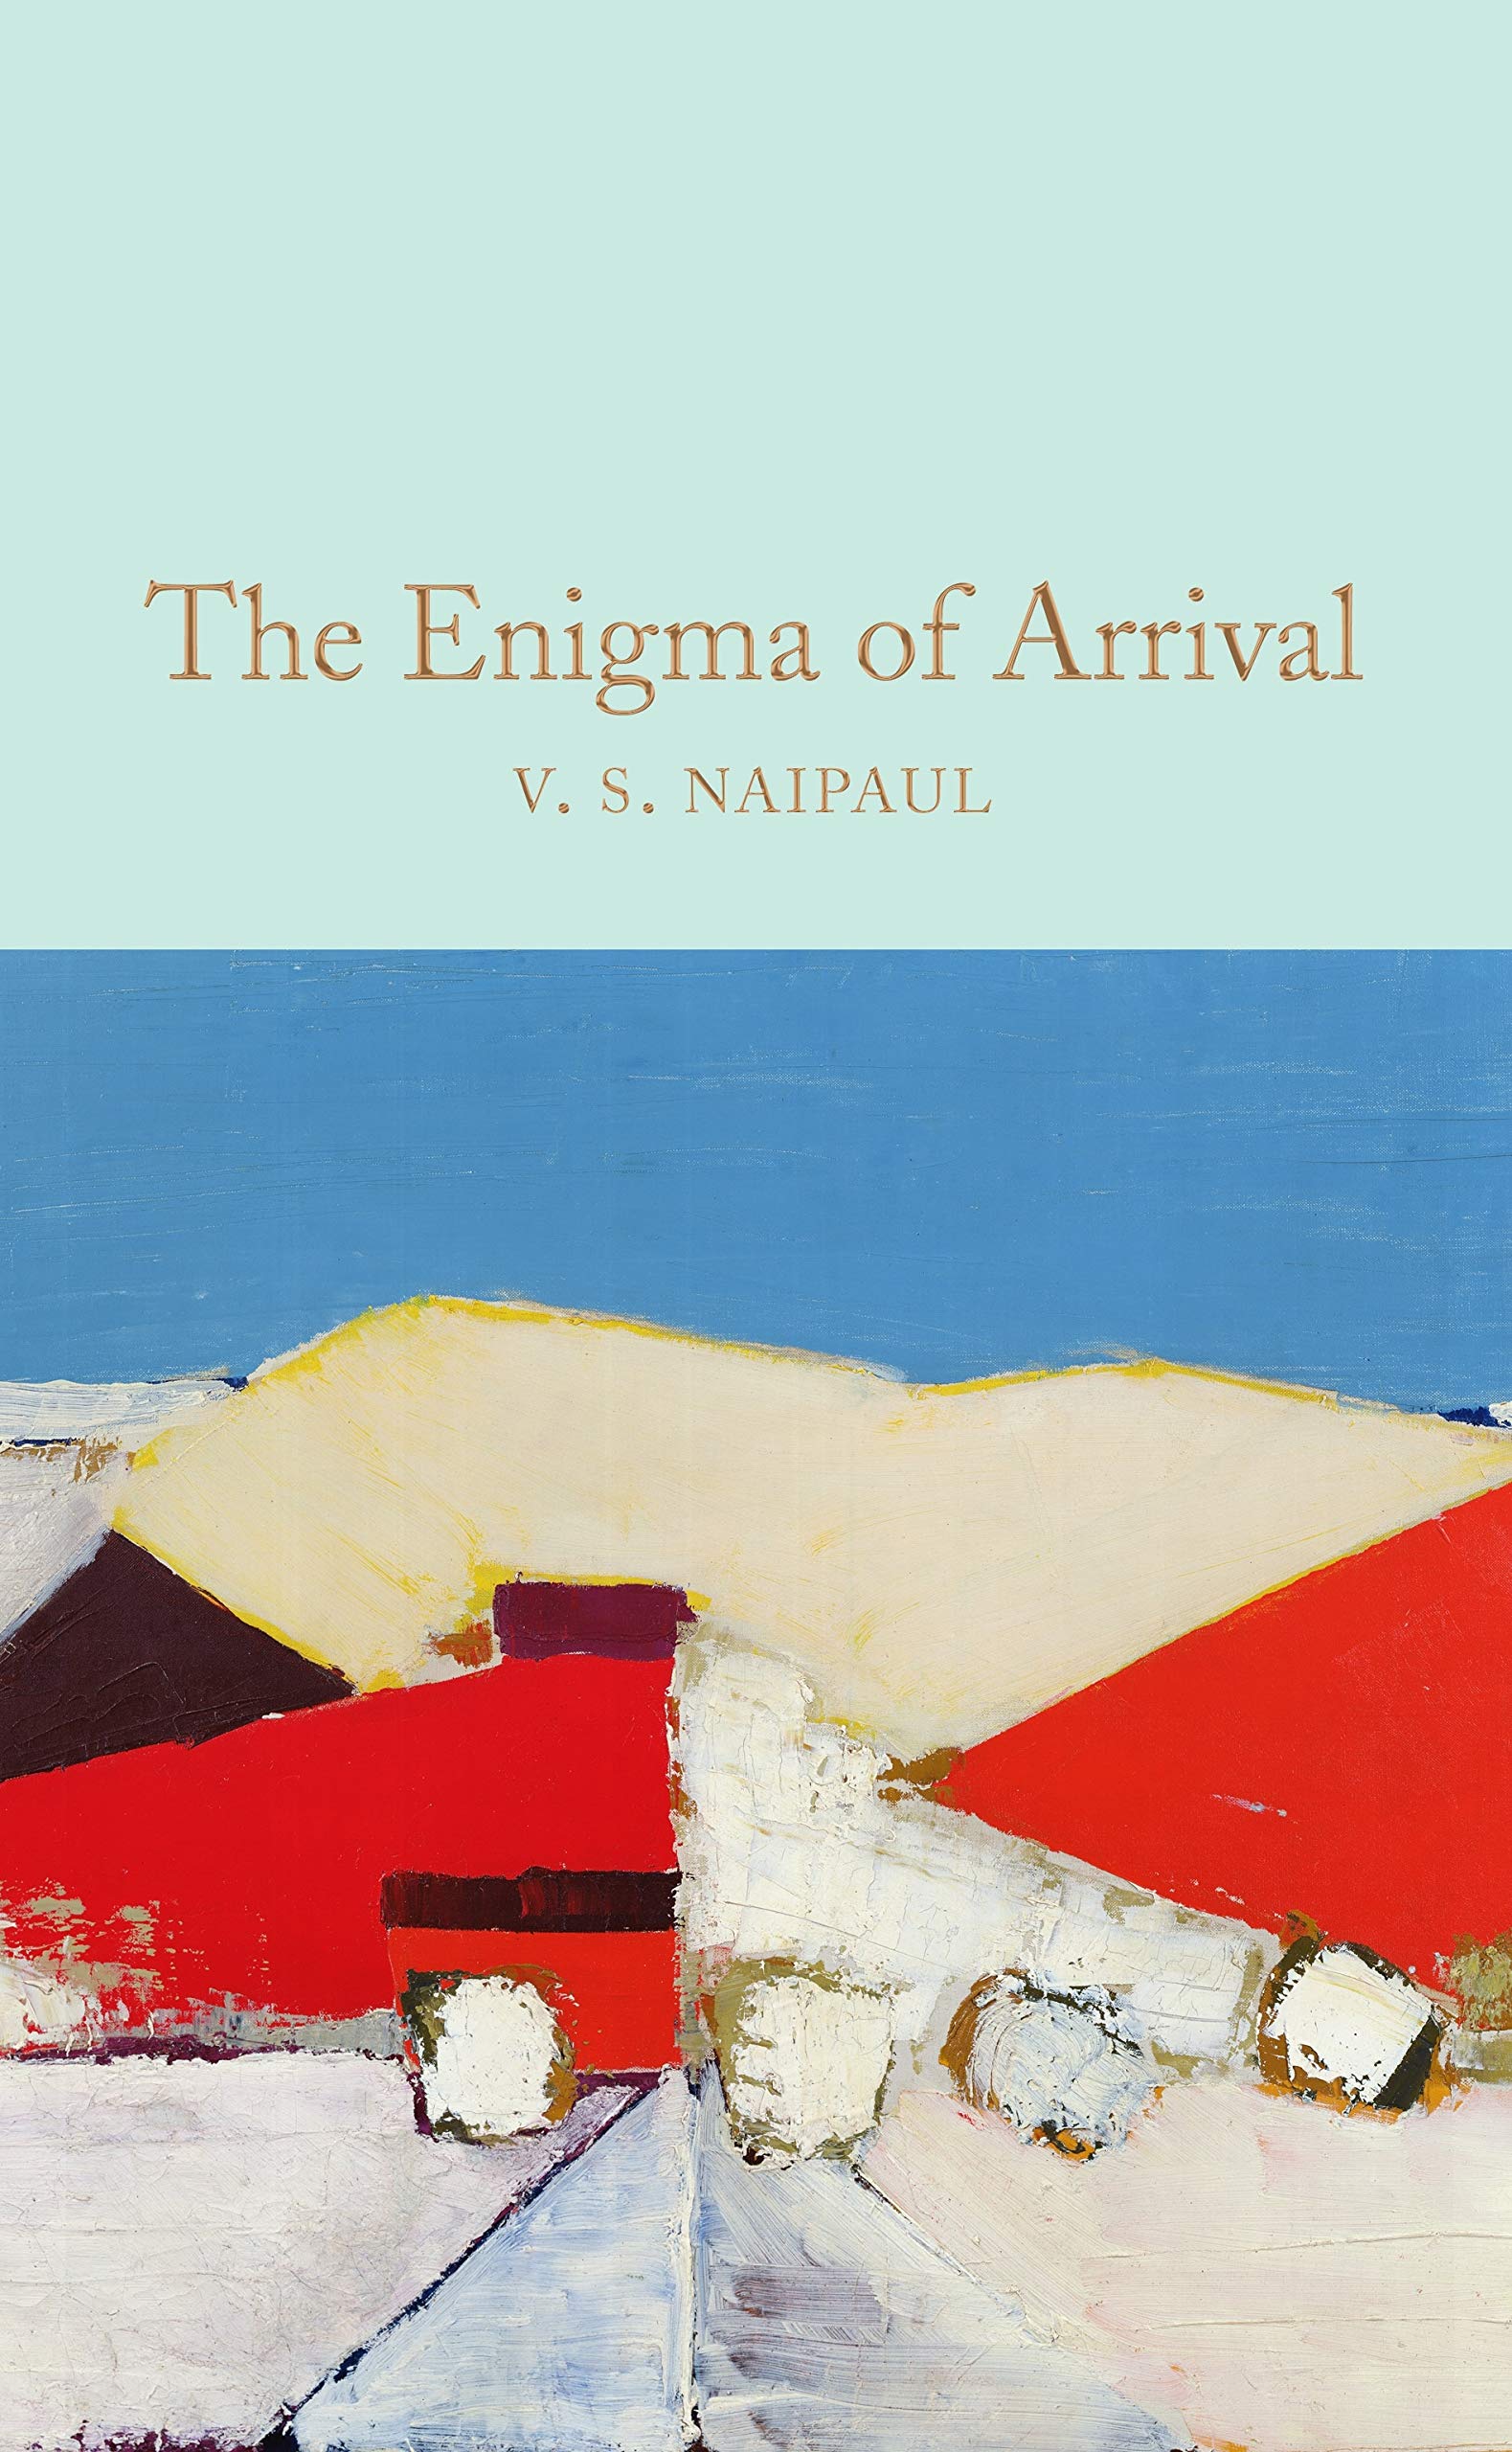 The Enigma of Arrival | V. S. Naipaul image12